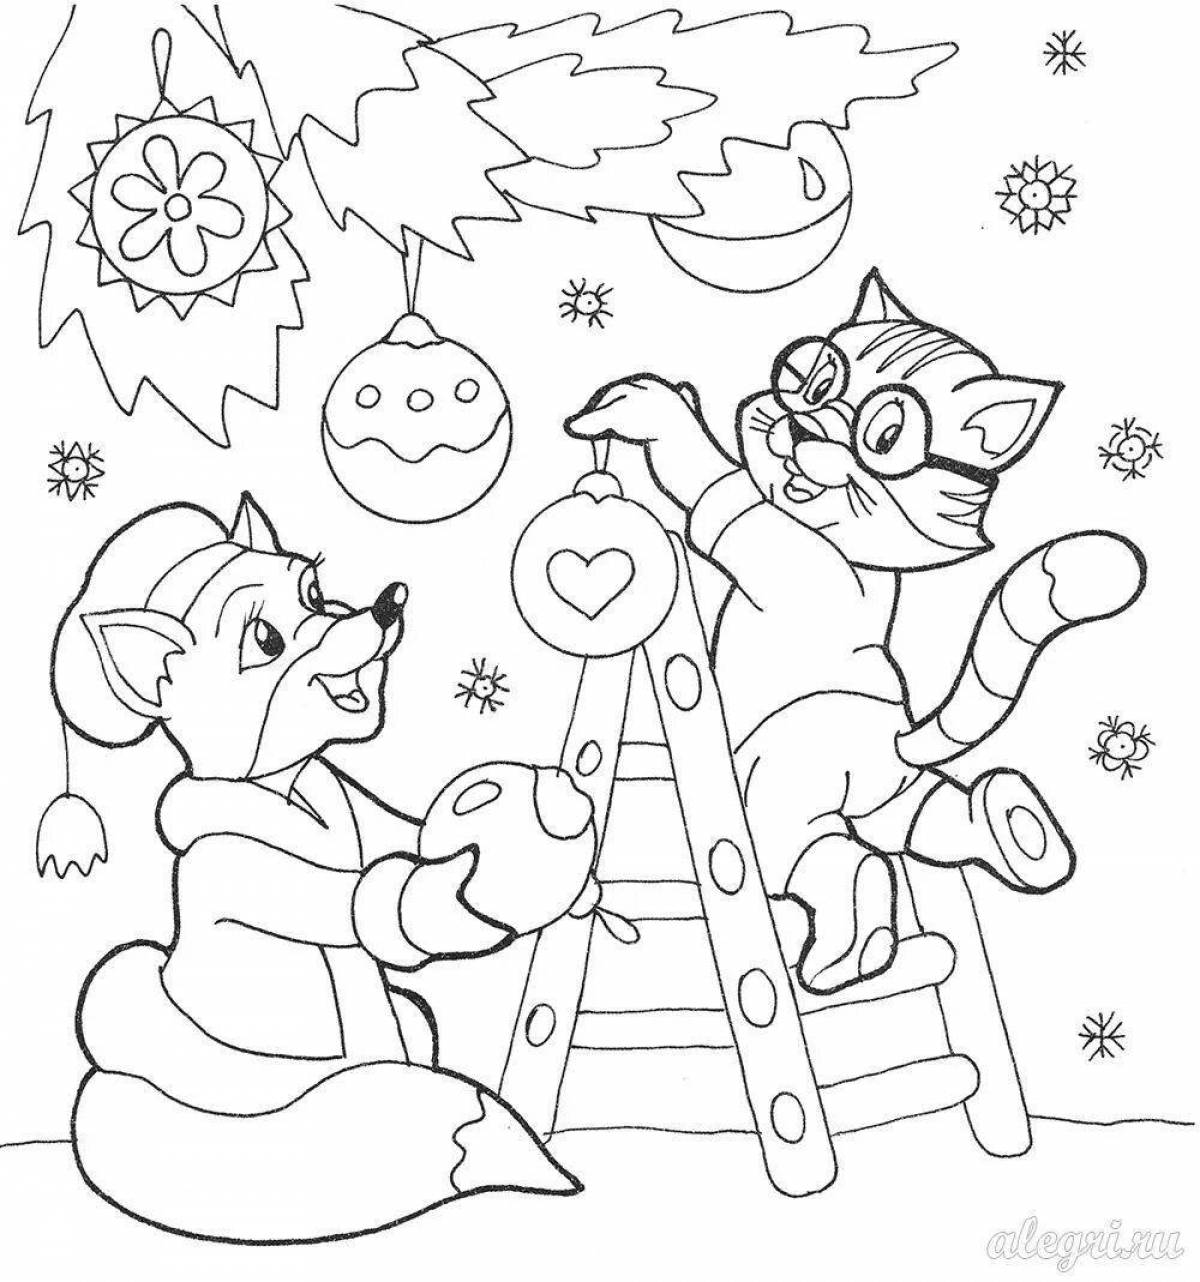 Christmas coloring book for children 5-6 years old